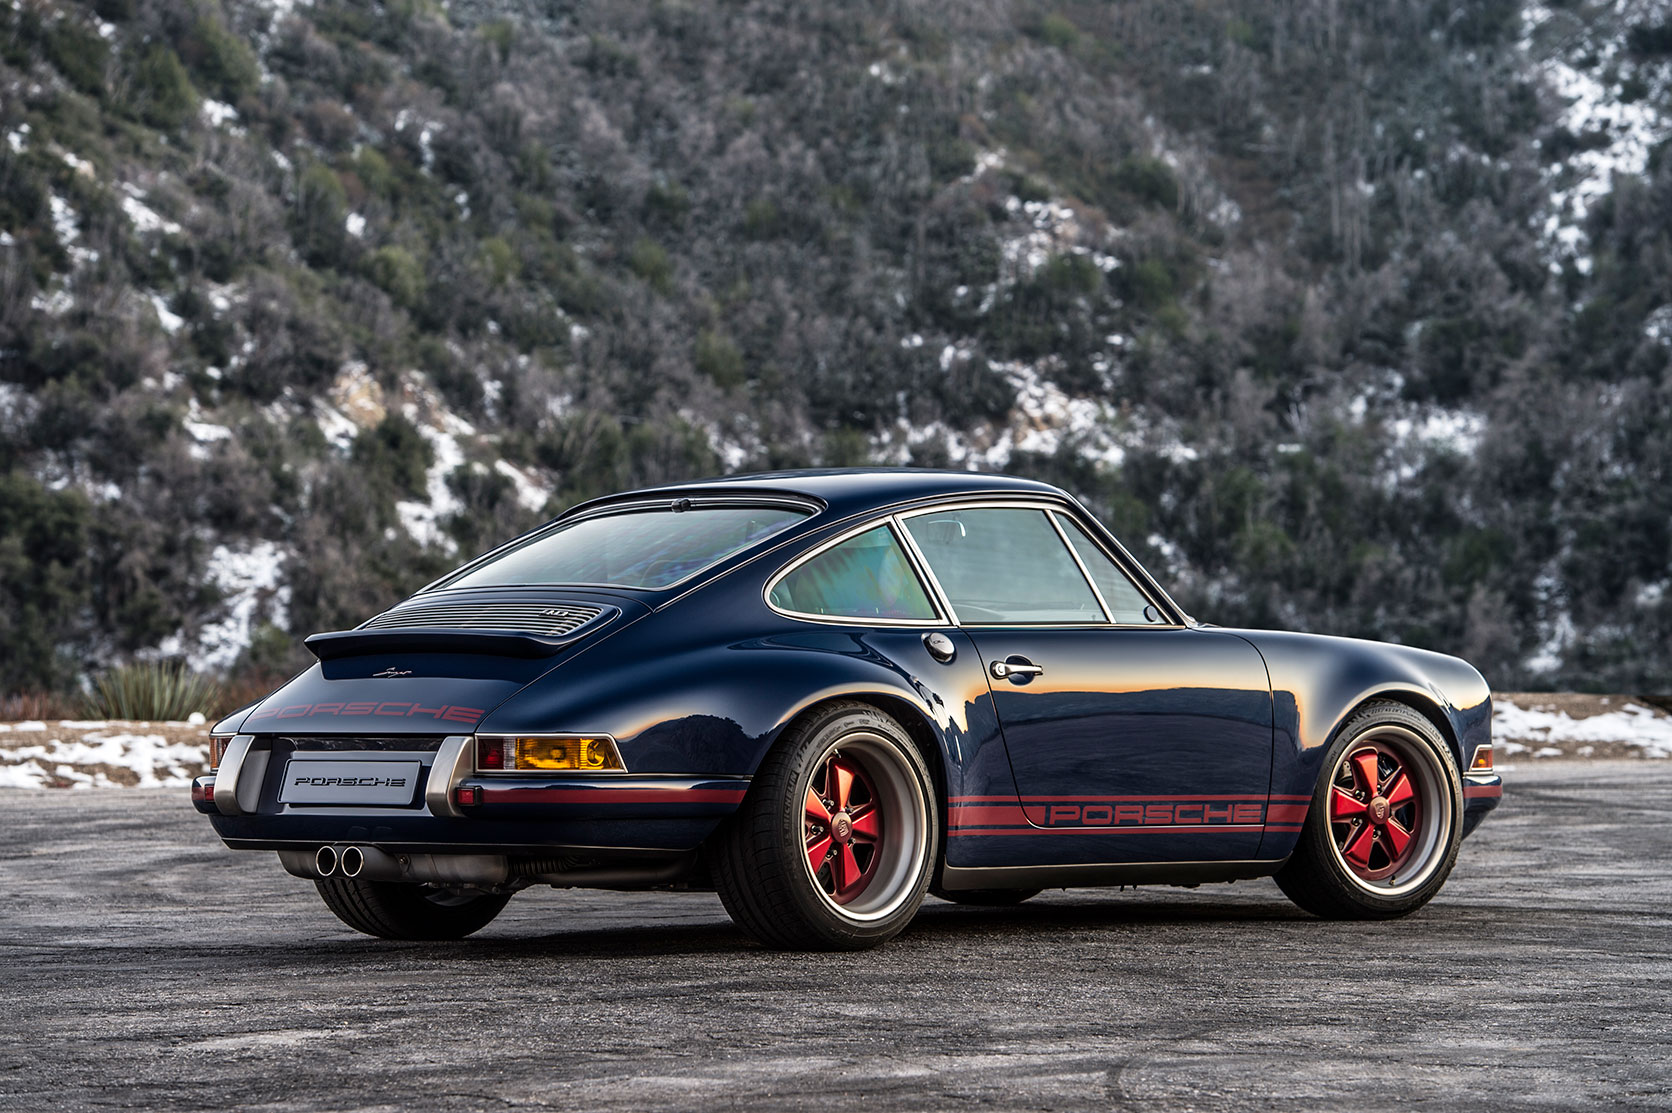 Singer’s Latest Porsche Restoration Is a Thing of Unfathomable Beauty